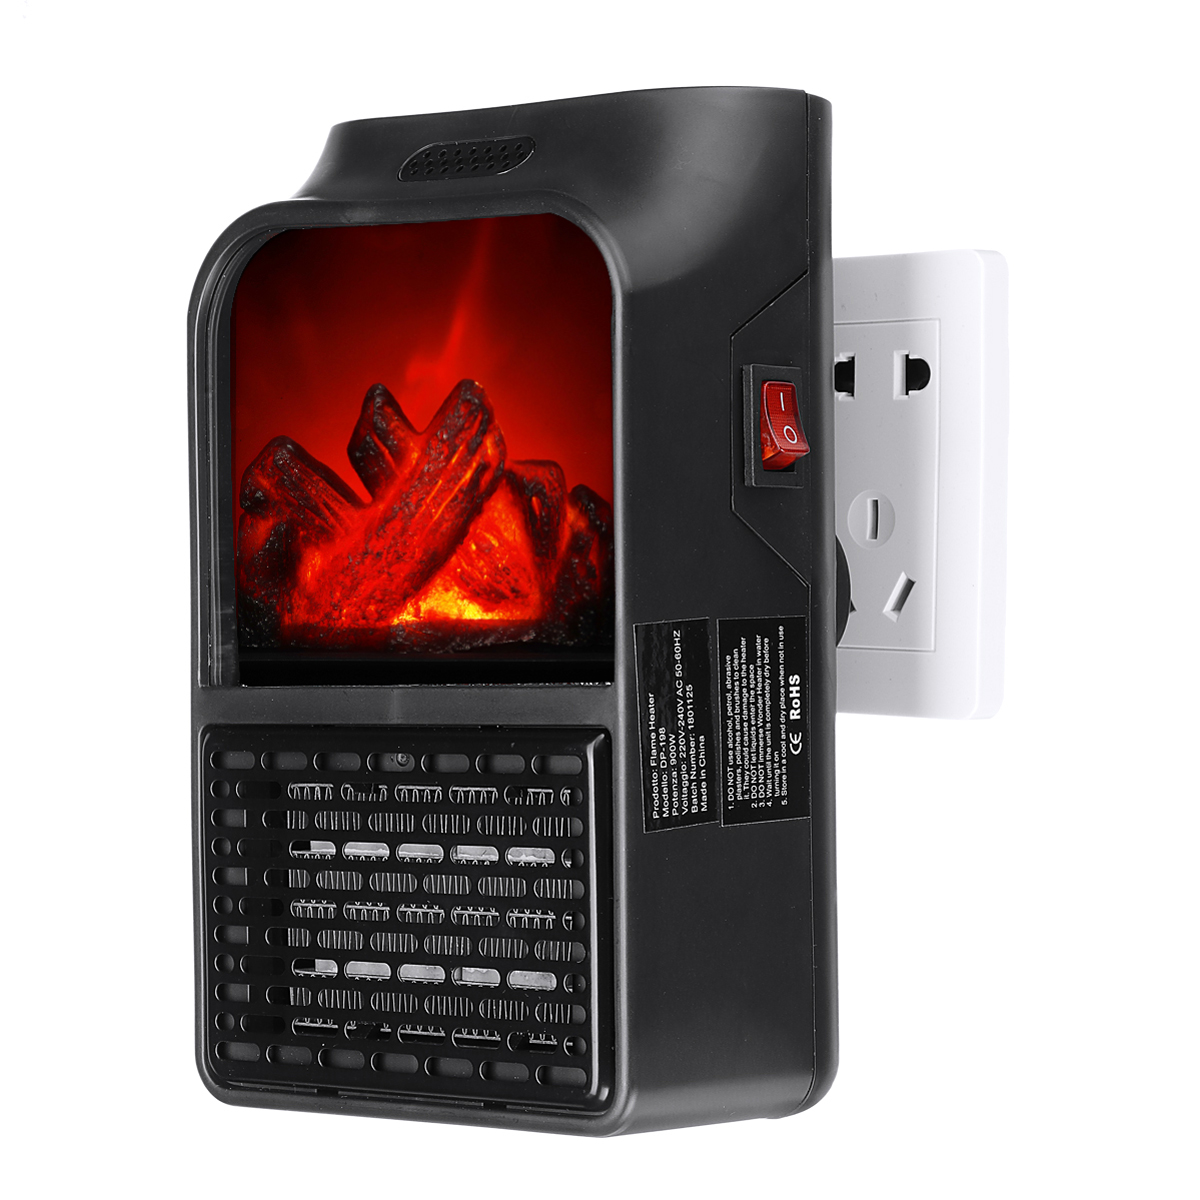 

900W Mini Portable Electric Heater Fan Air Warmer Fireplace Flame Heater Remote Control